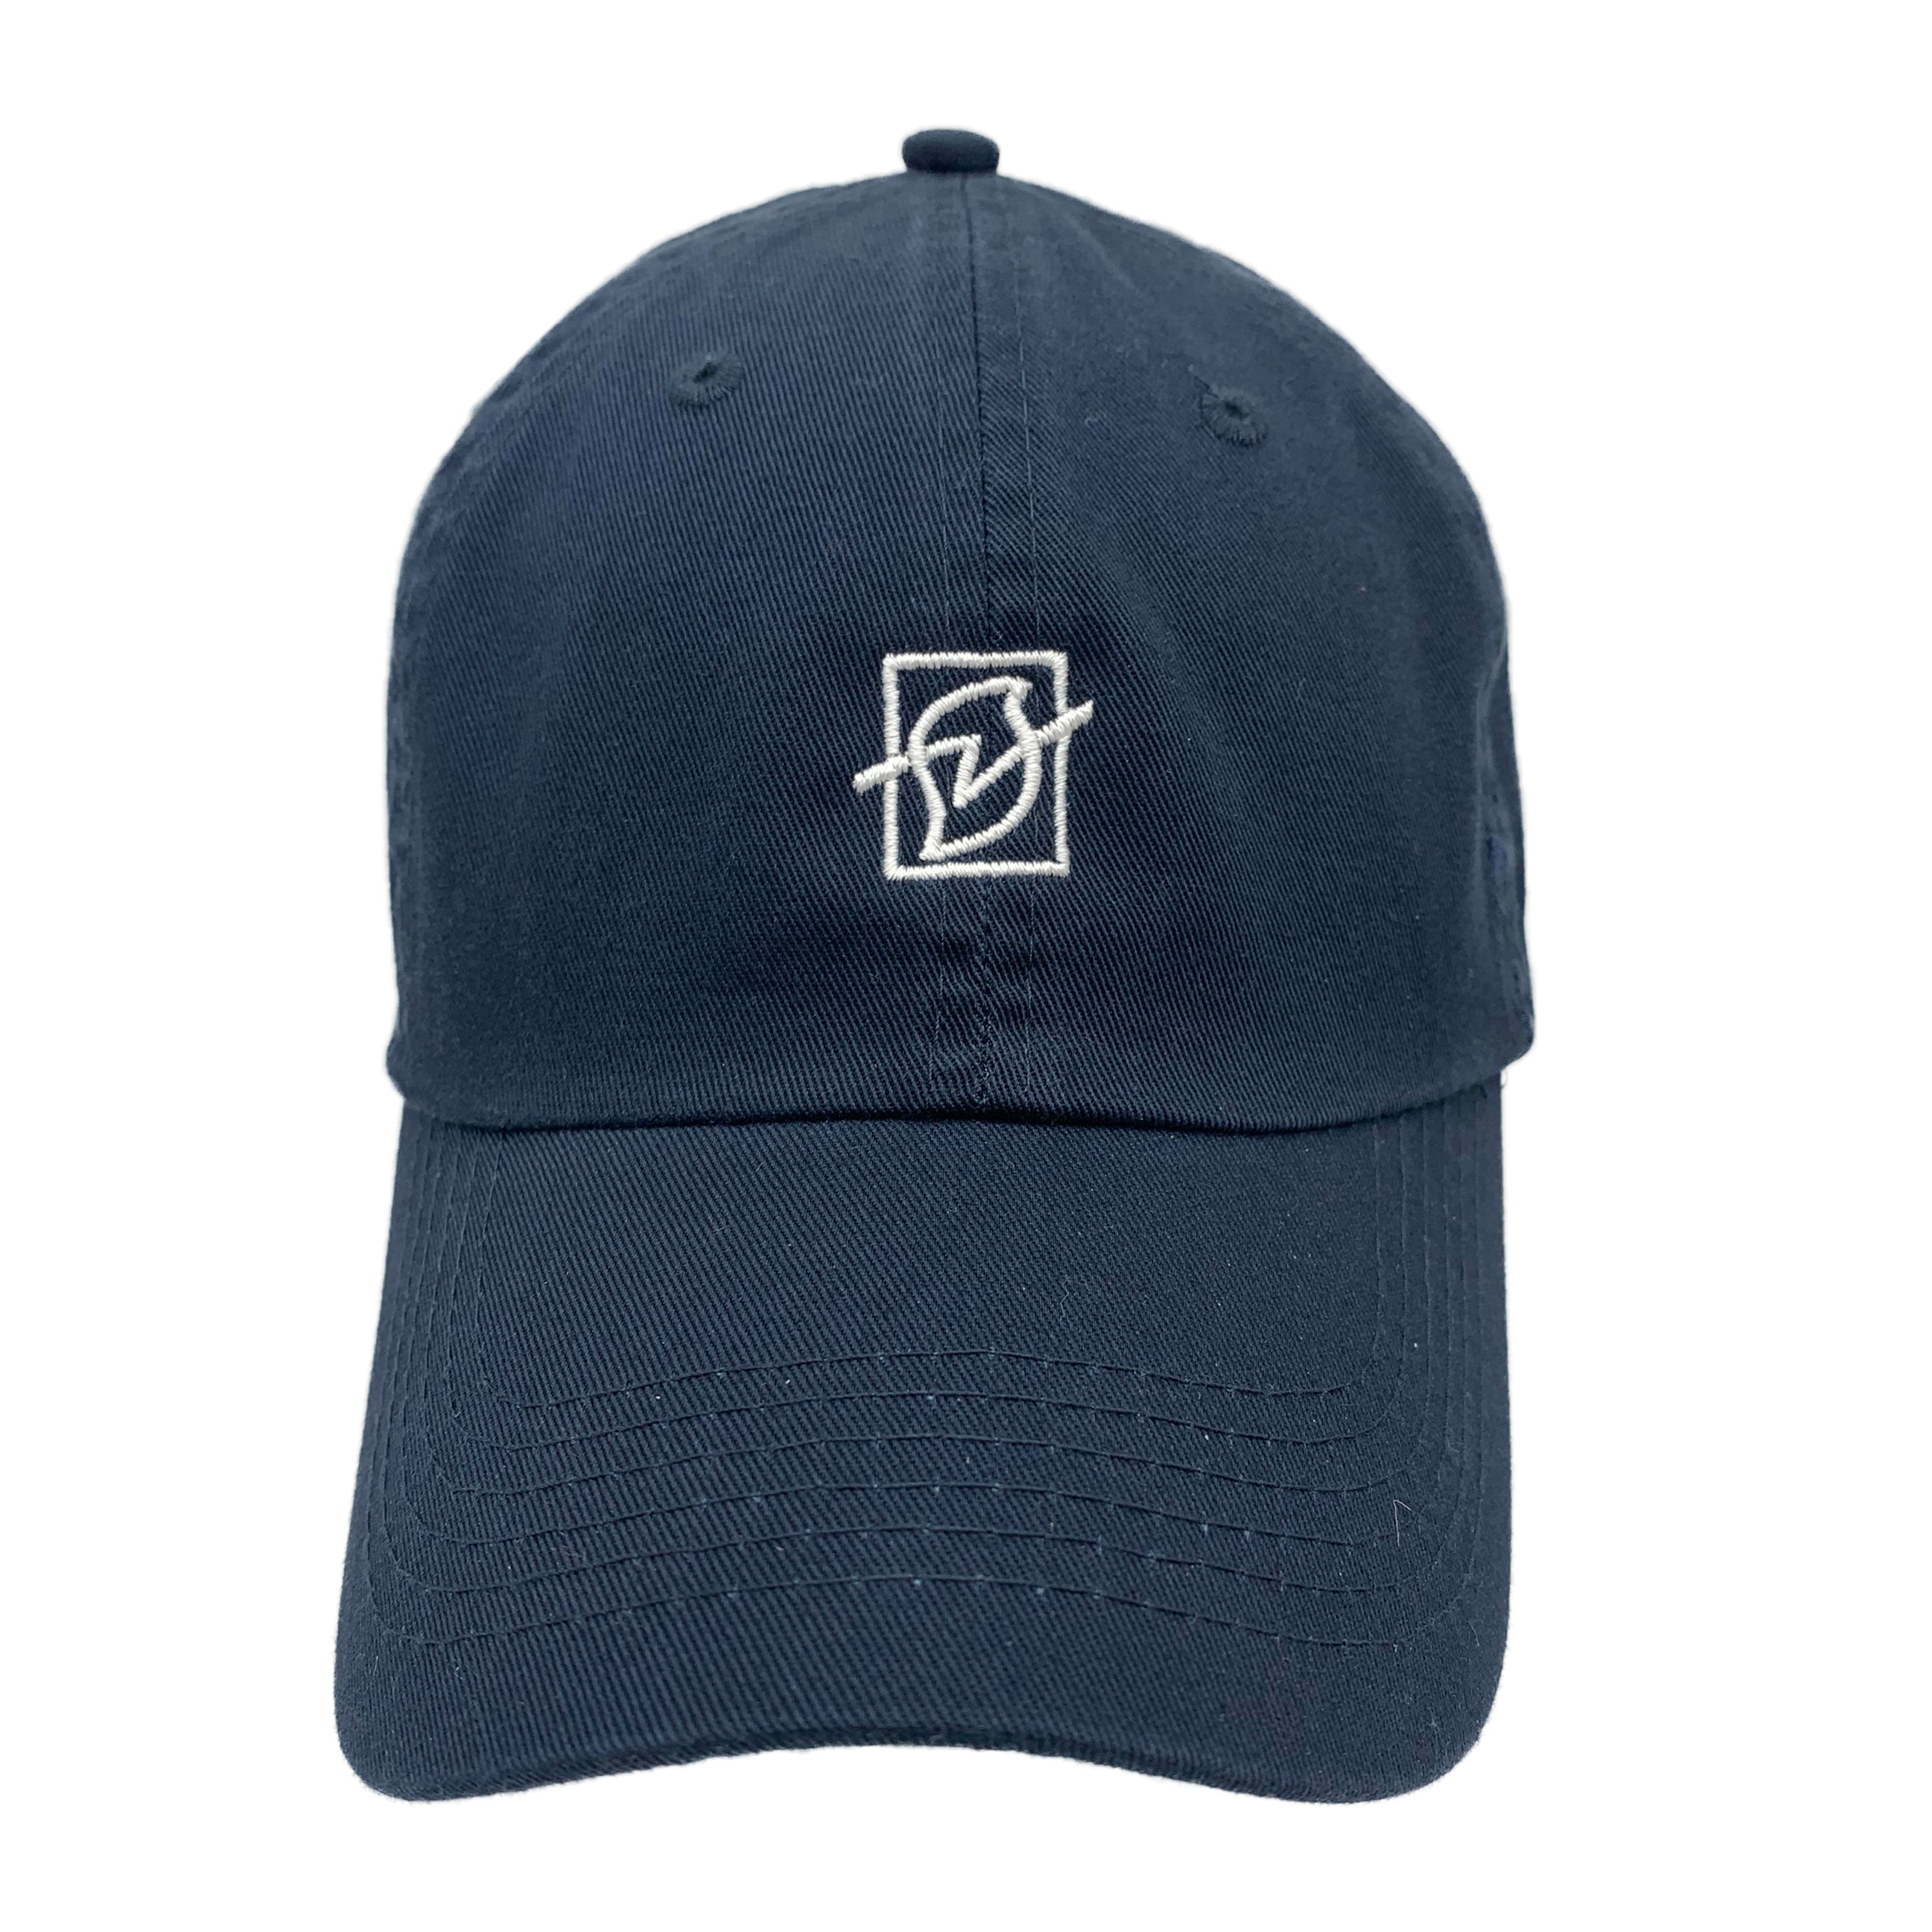 Vermin "ICON" Classic Embroidered Cap Navy